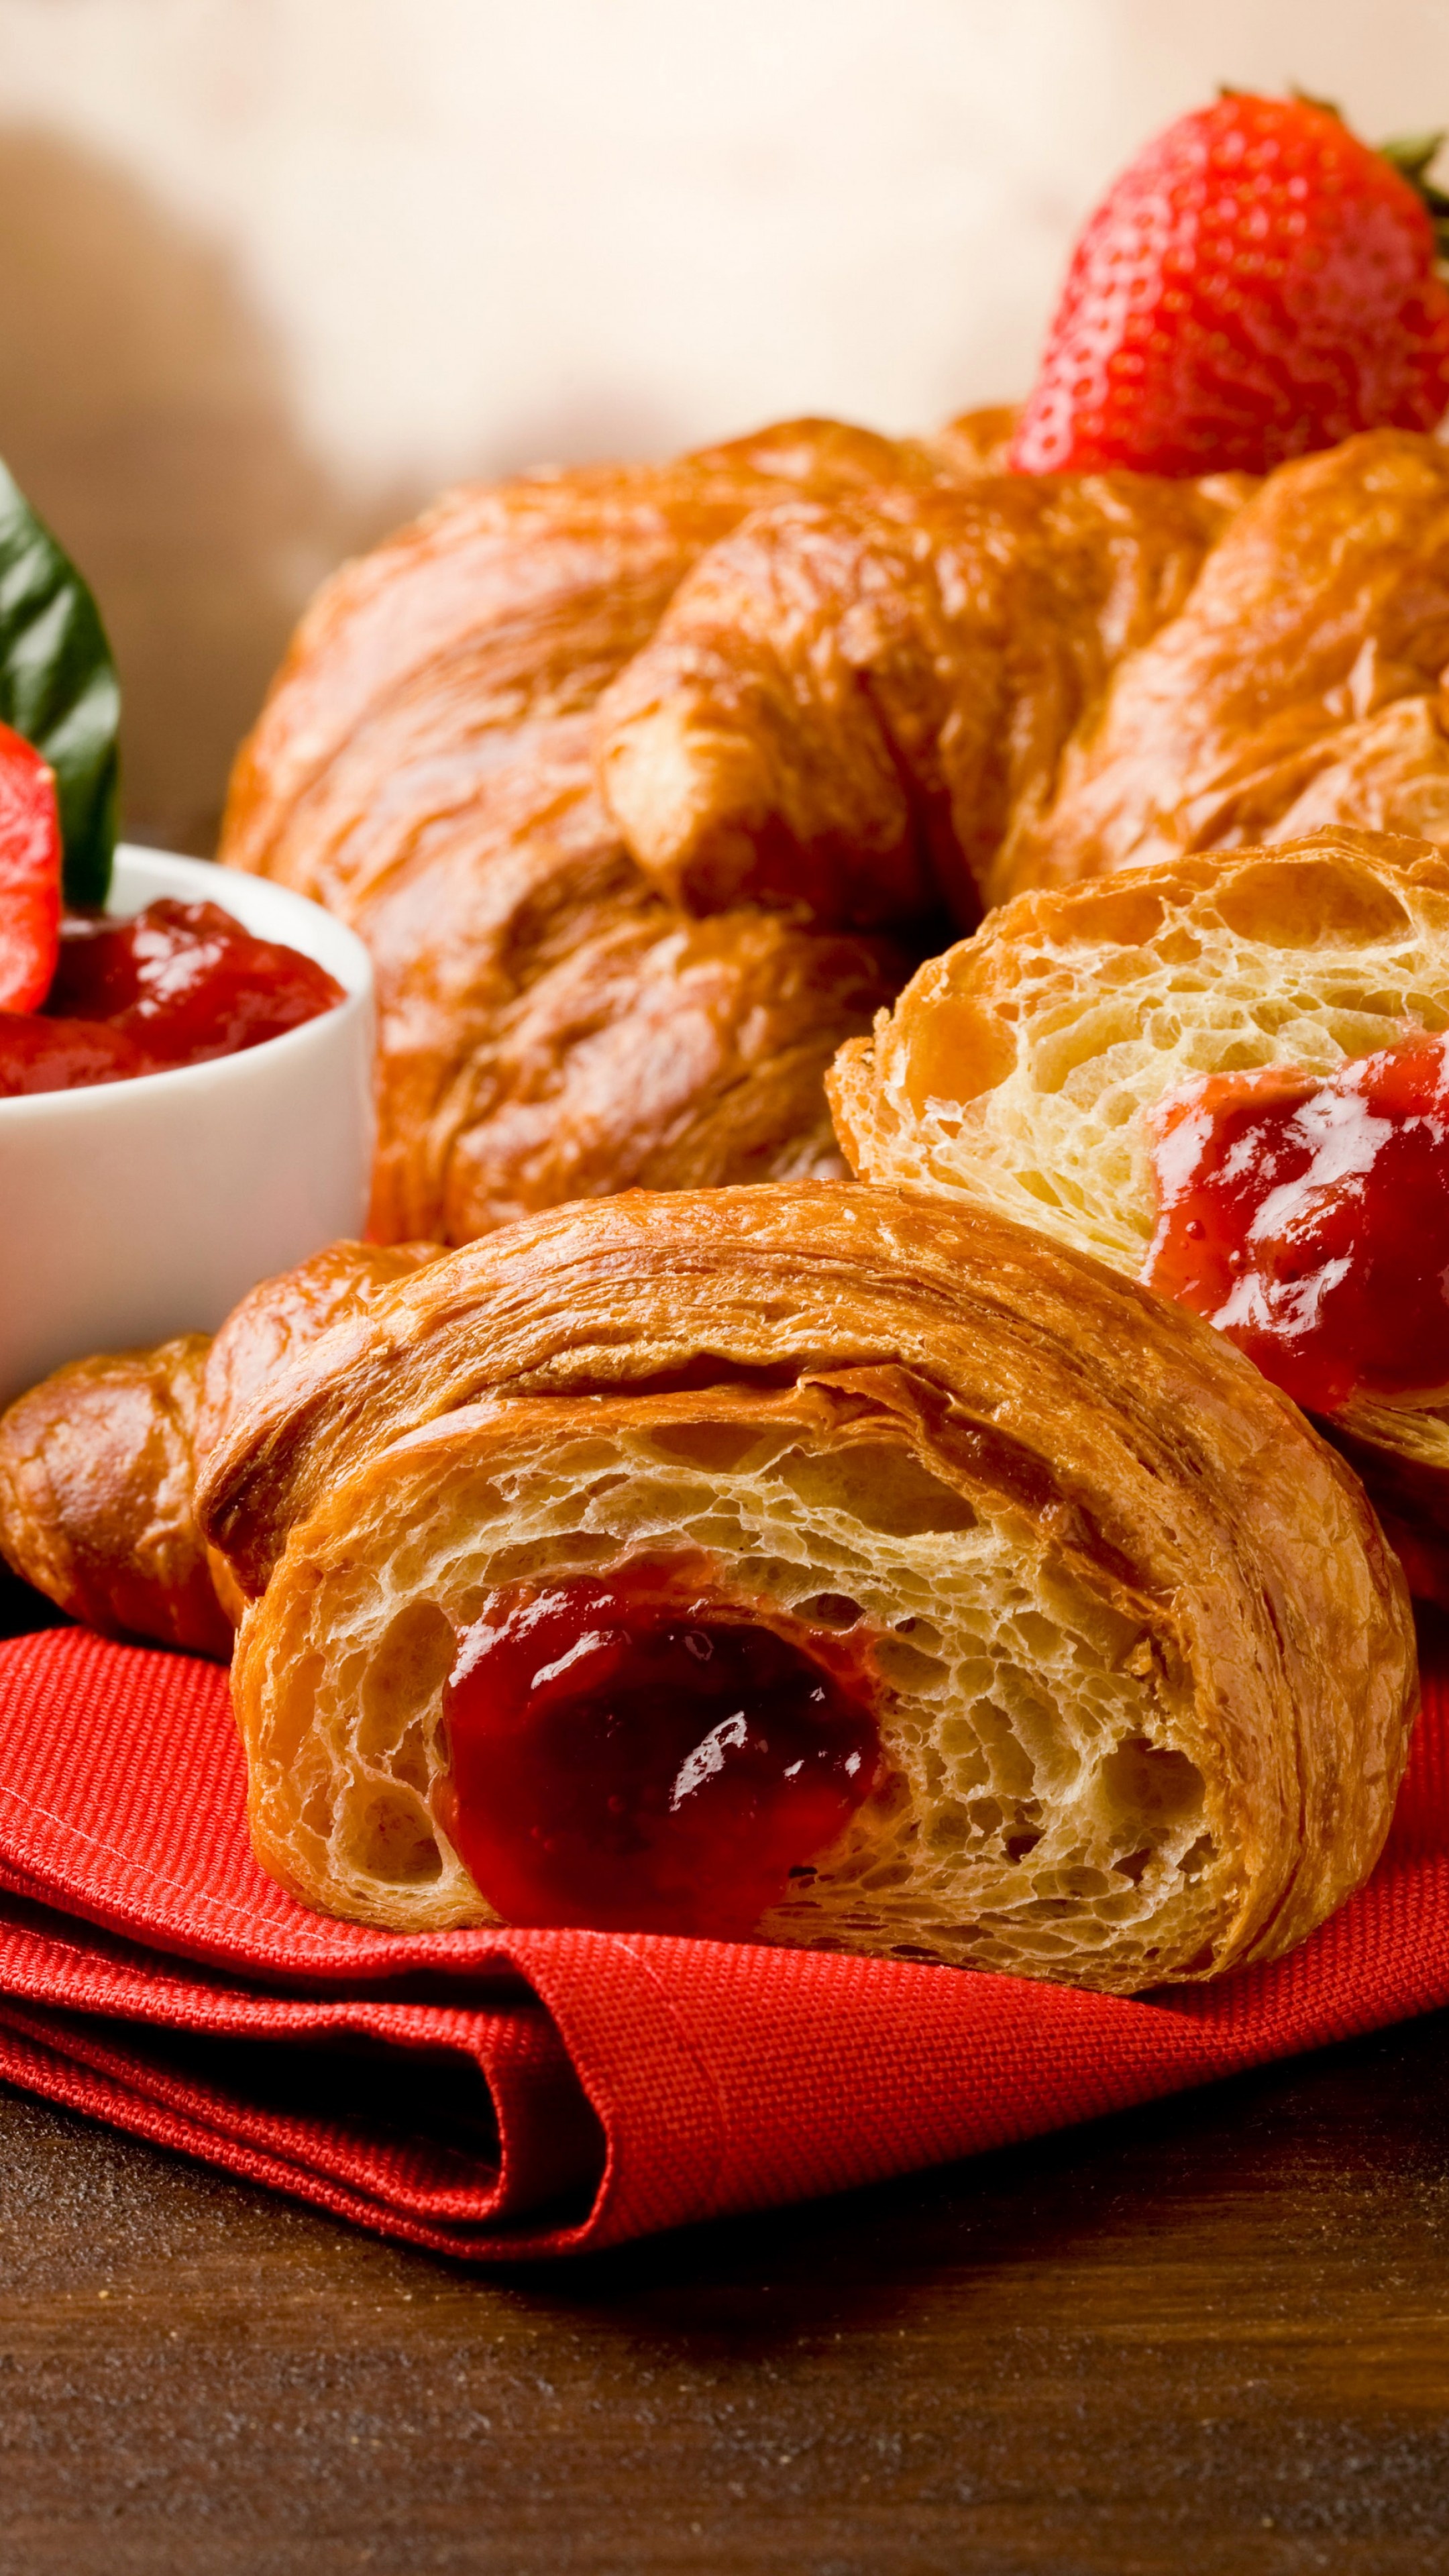 Jam, French croissants, Strawberry jam, Flavorful combo, 2160x3840 4K Handy